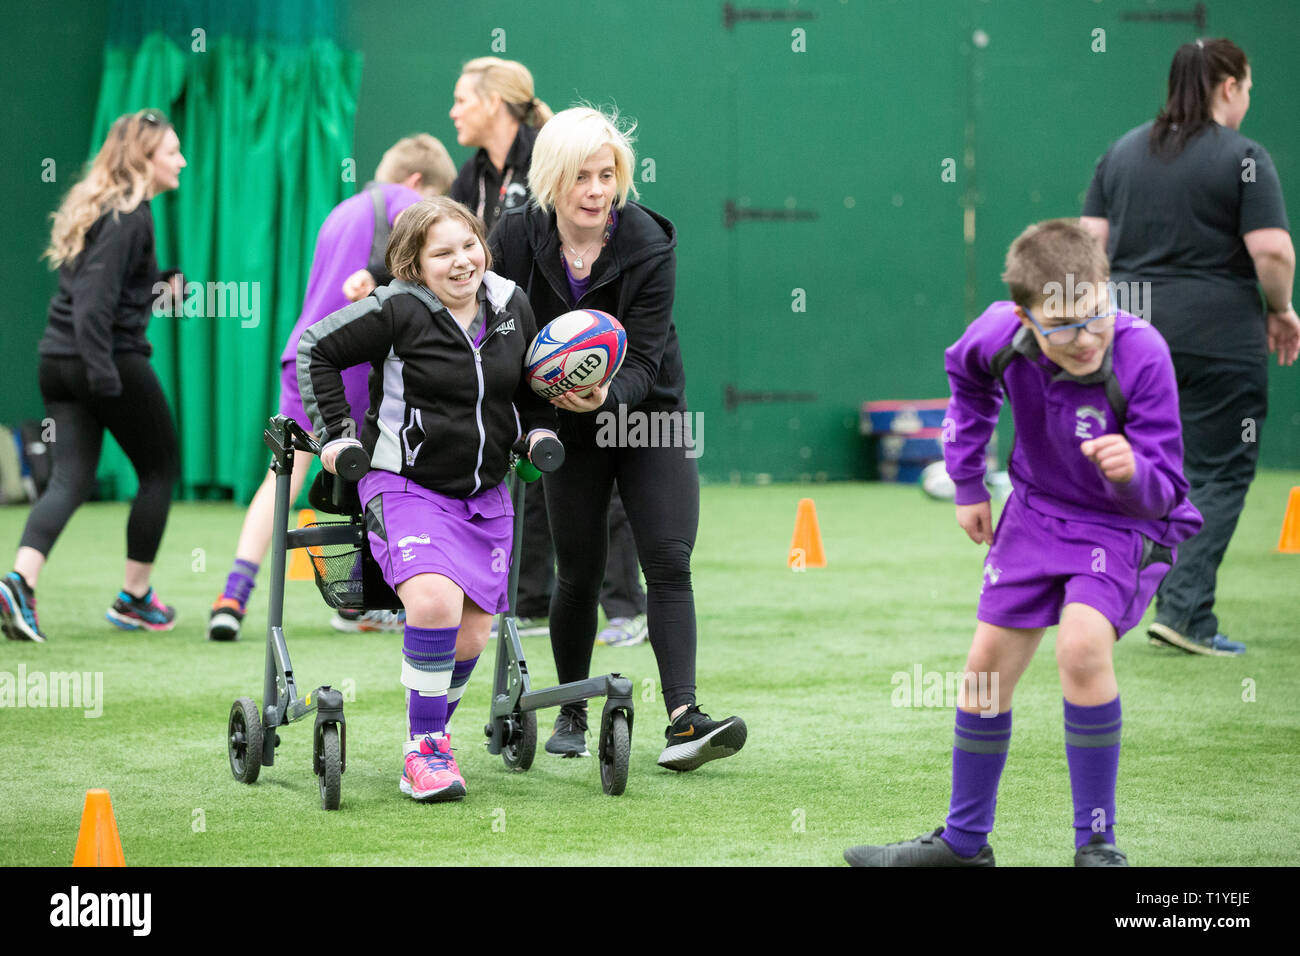 Llandarcy Academy of Sport, Swansea, Wales, UK. Friday 29 March 2019.  Participants at the WRU Disability Strategy Update event, where ten specially designed wheelchairs, a gift to the WRU, were used for the first time. Credit: Gruffydd Thomas/Alamy Live News Stock Photo